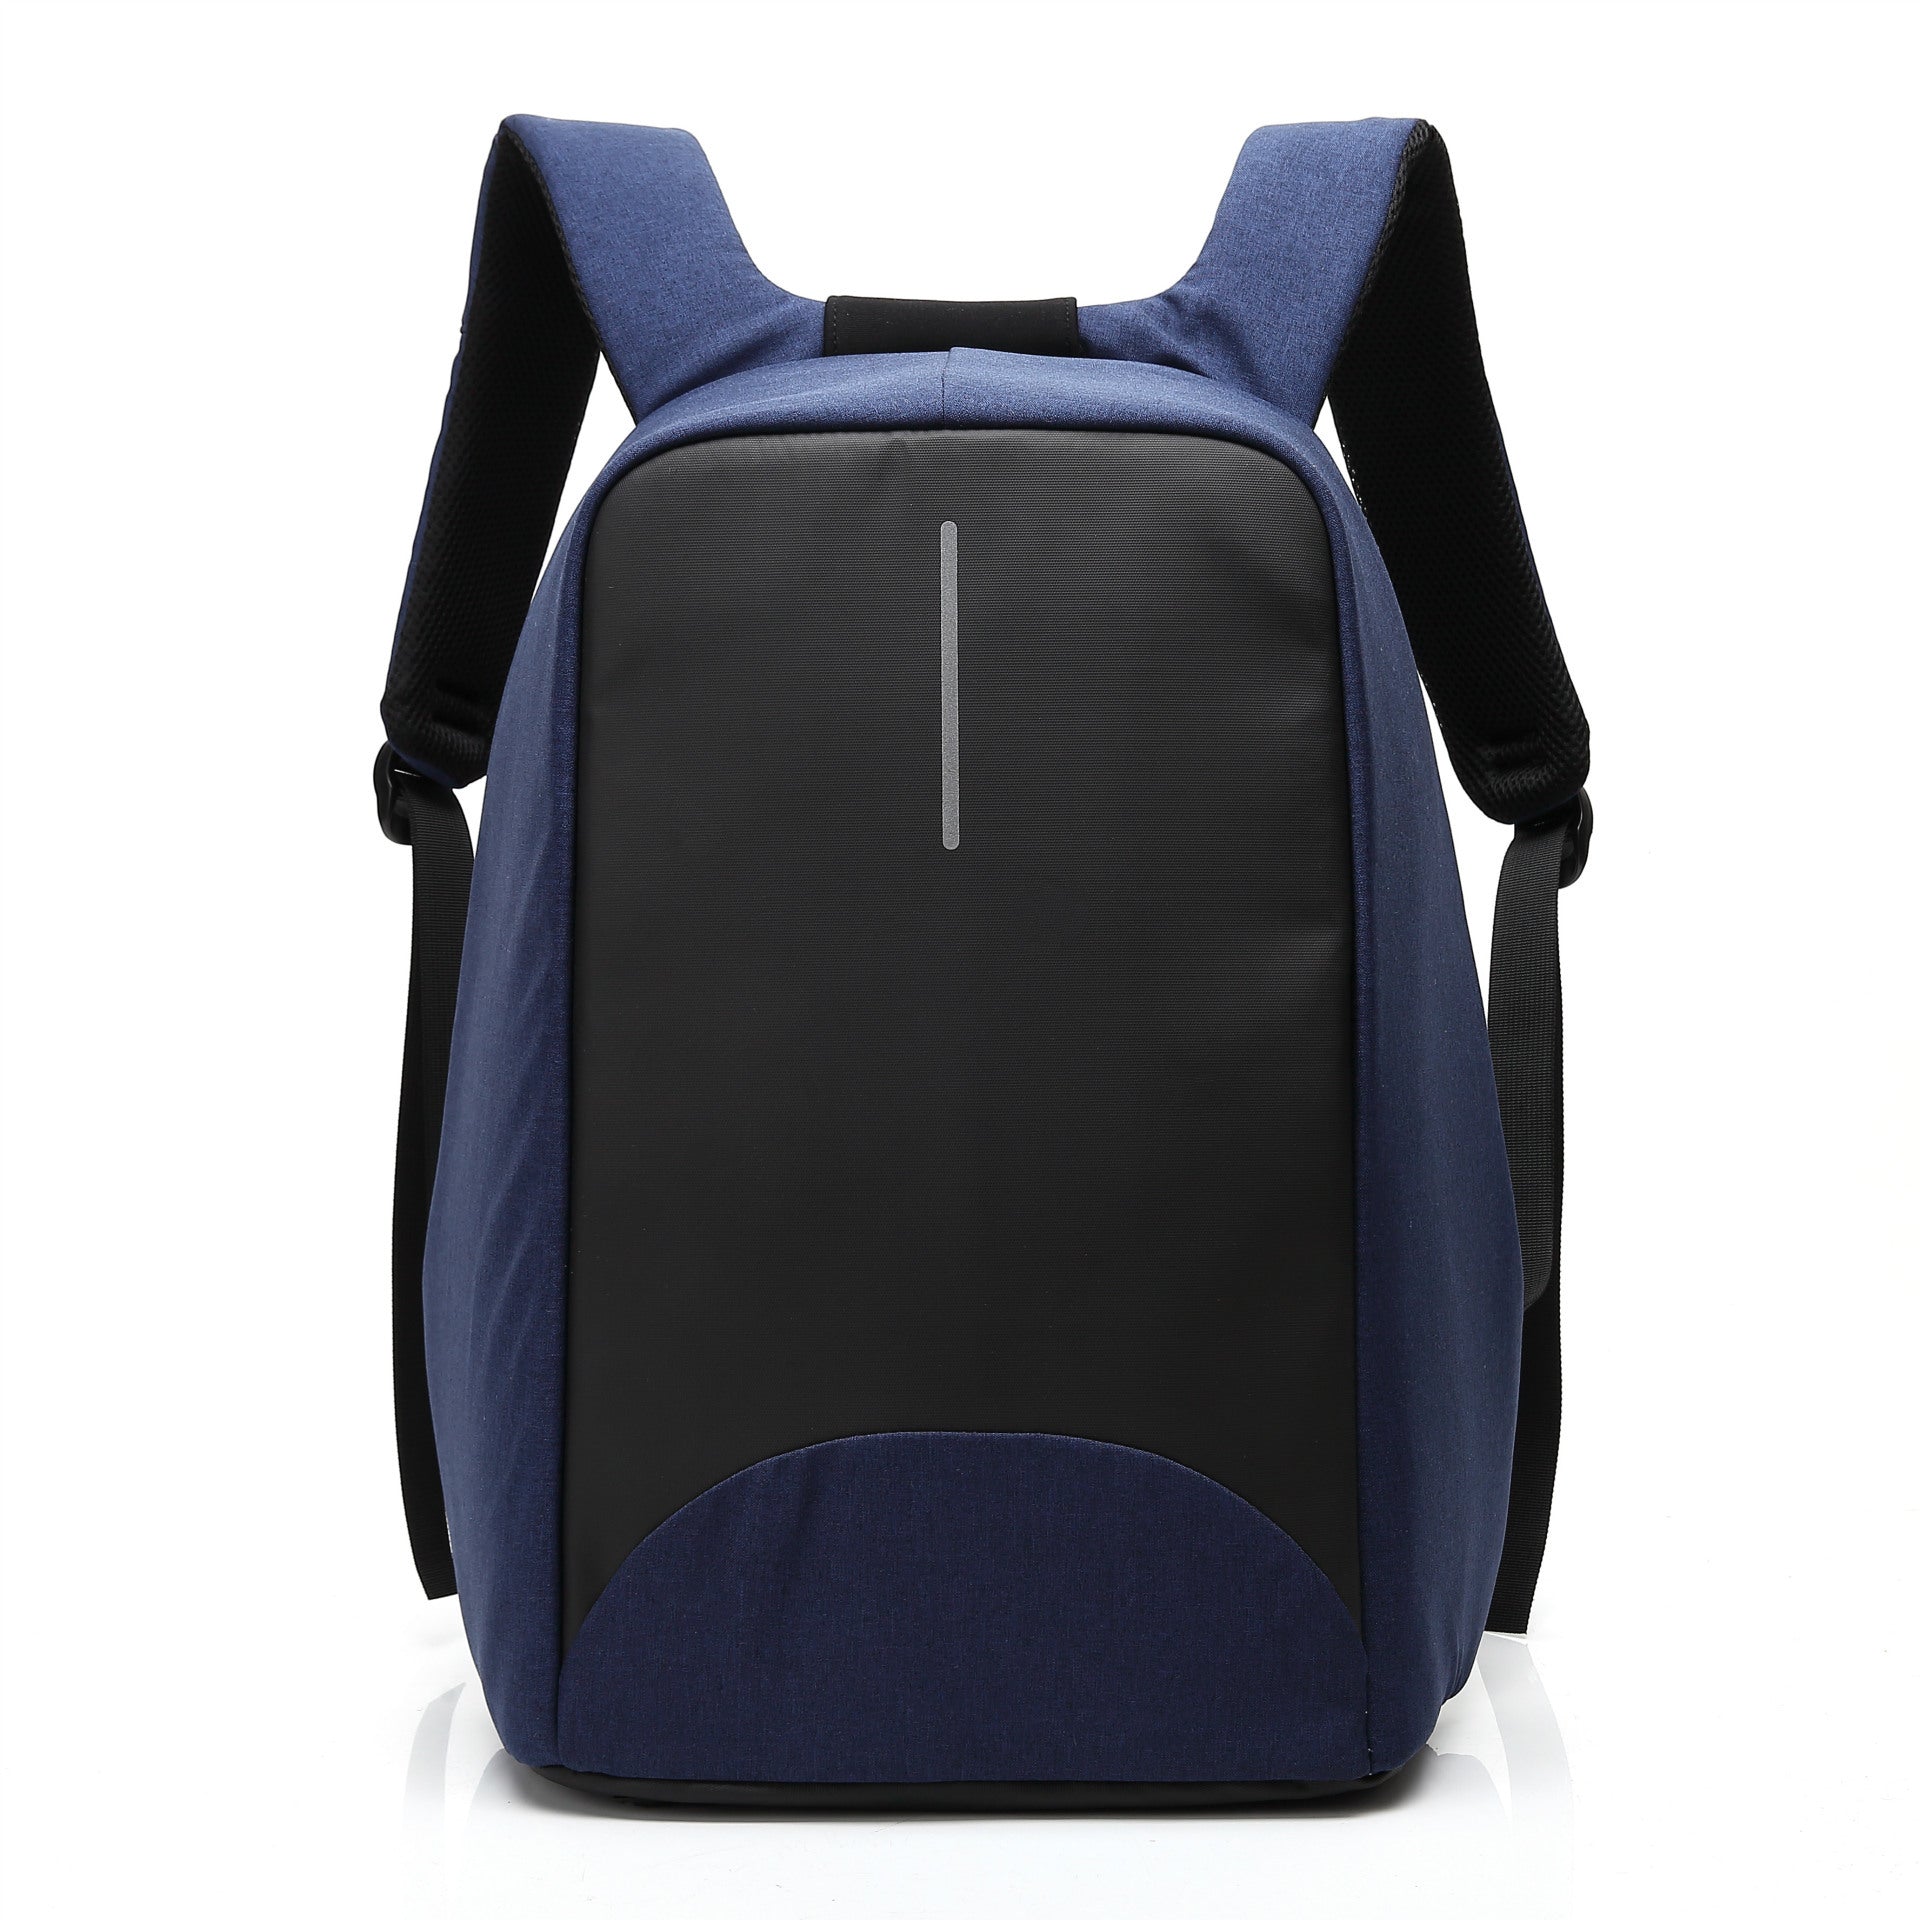 Men's business anti-theft computer backpack